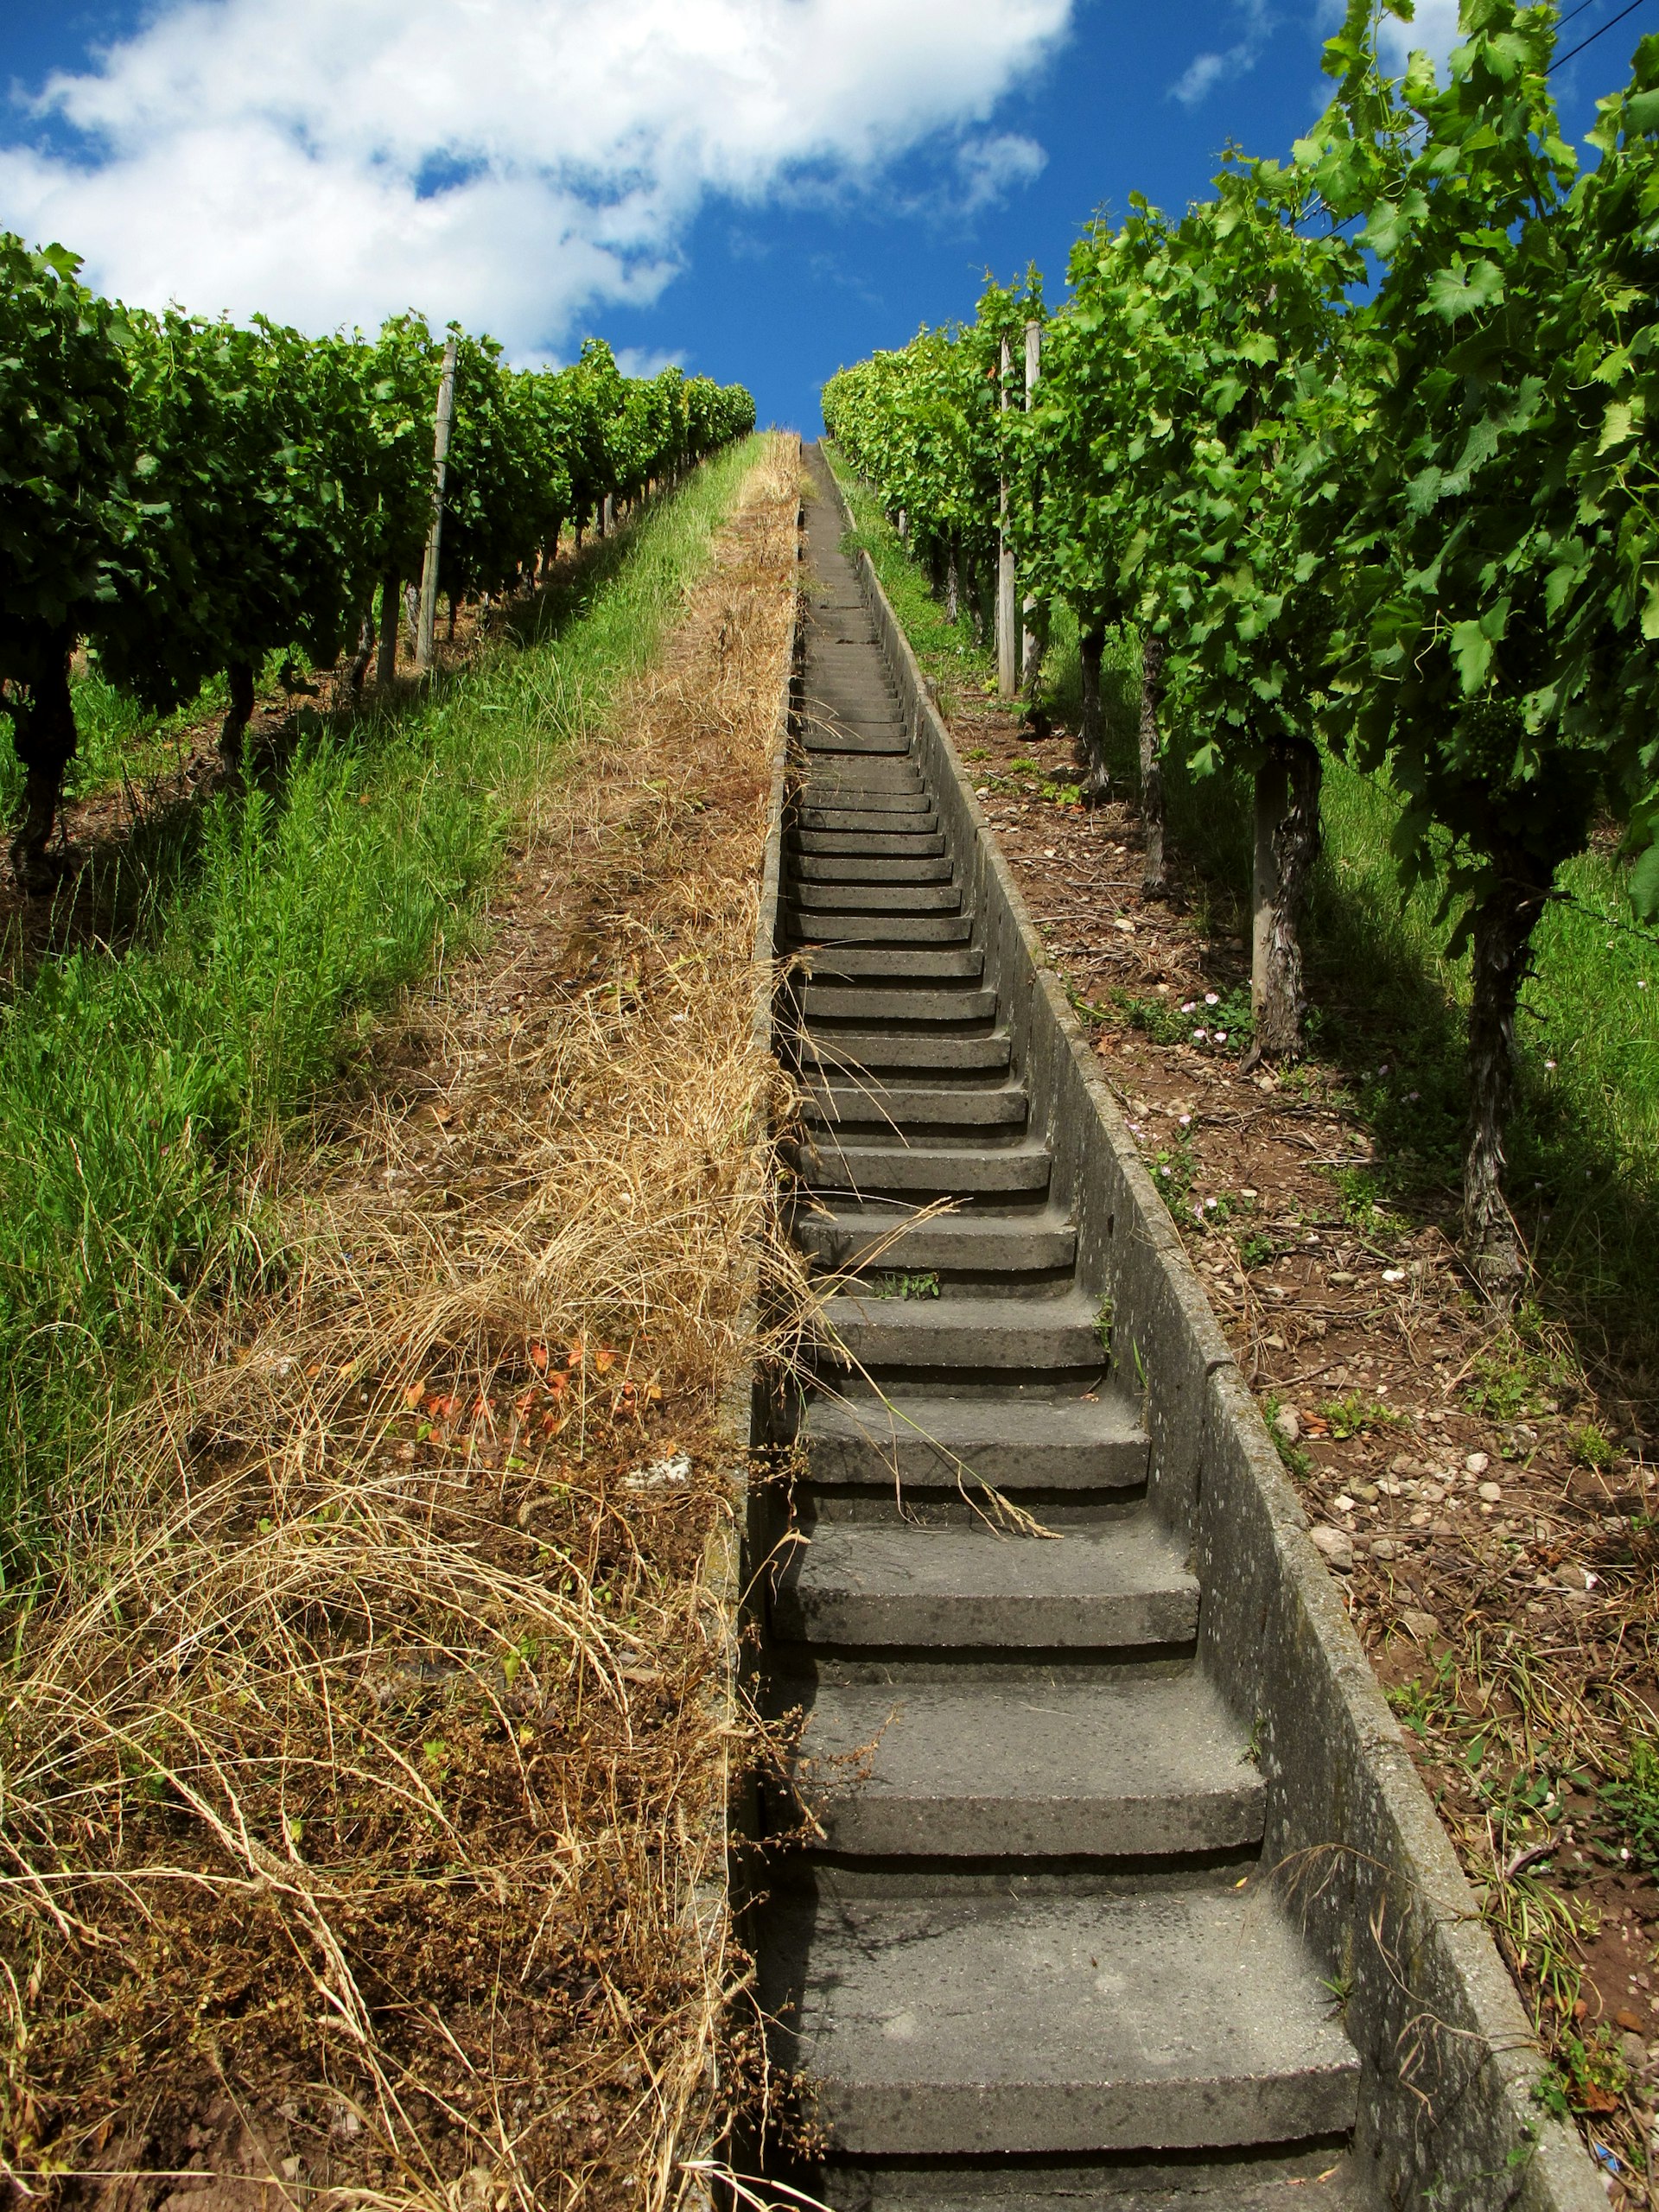 A narrow concrete staircase runs up a slope, with lush green vines on either side of it.